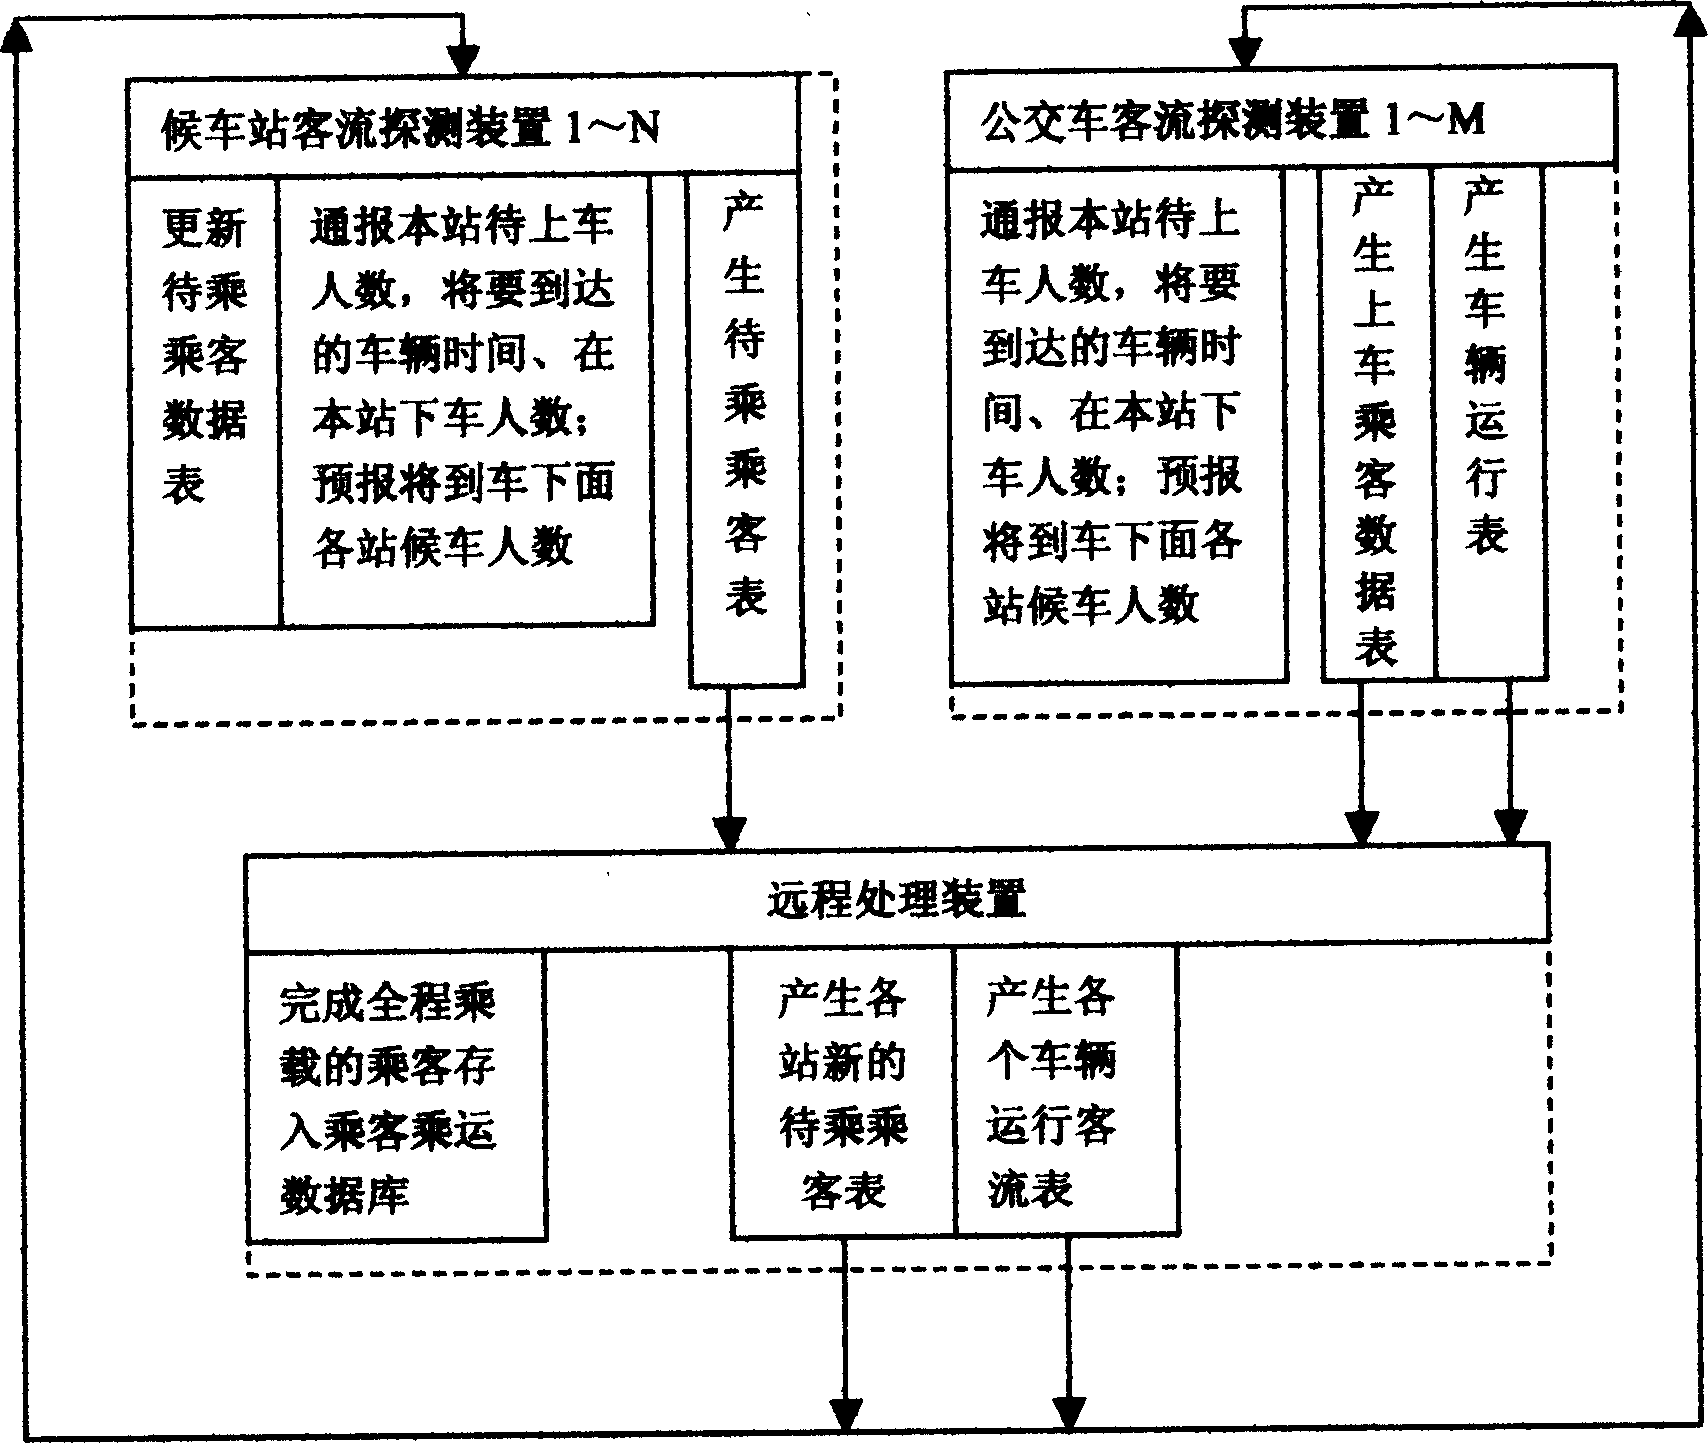 Method and device for monitoring public communication passenger flow using network remote observation